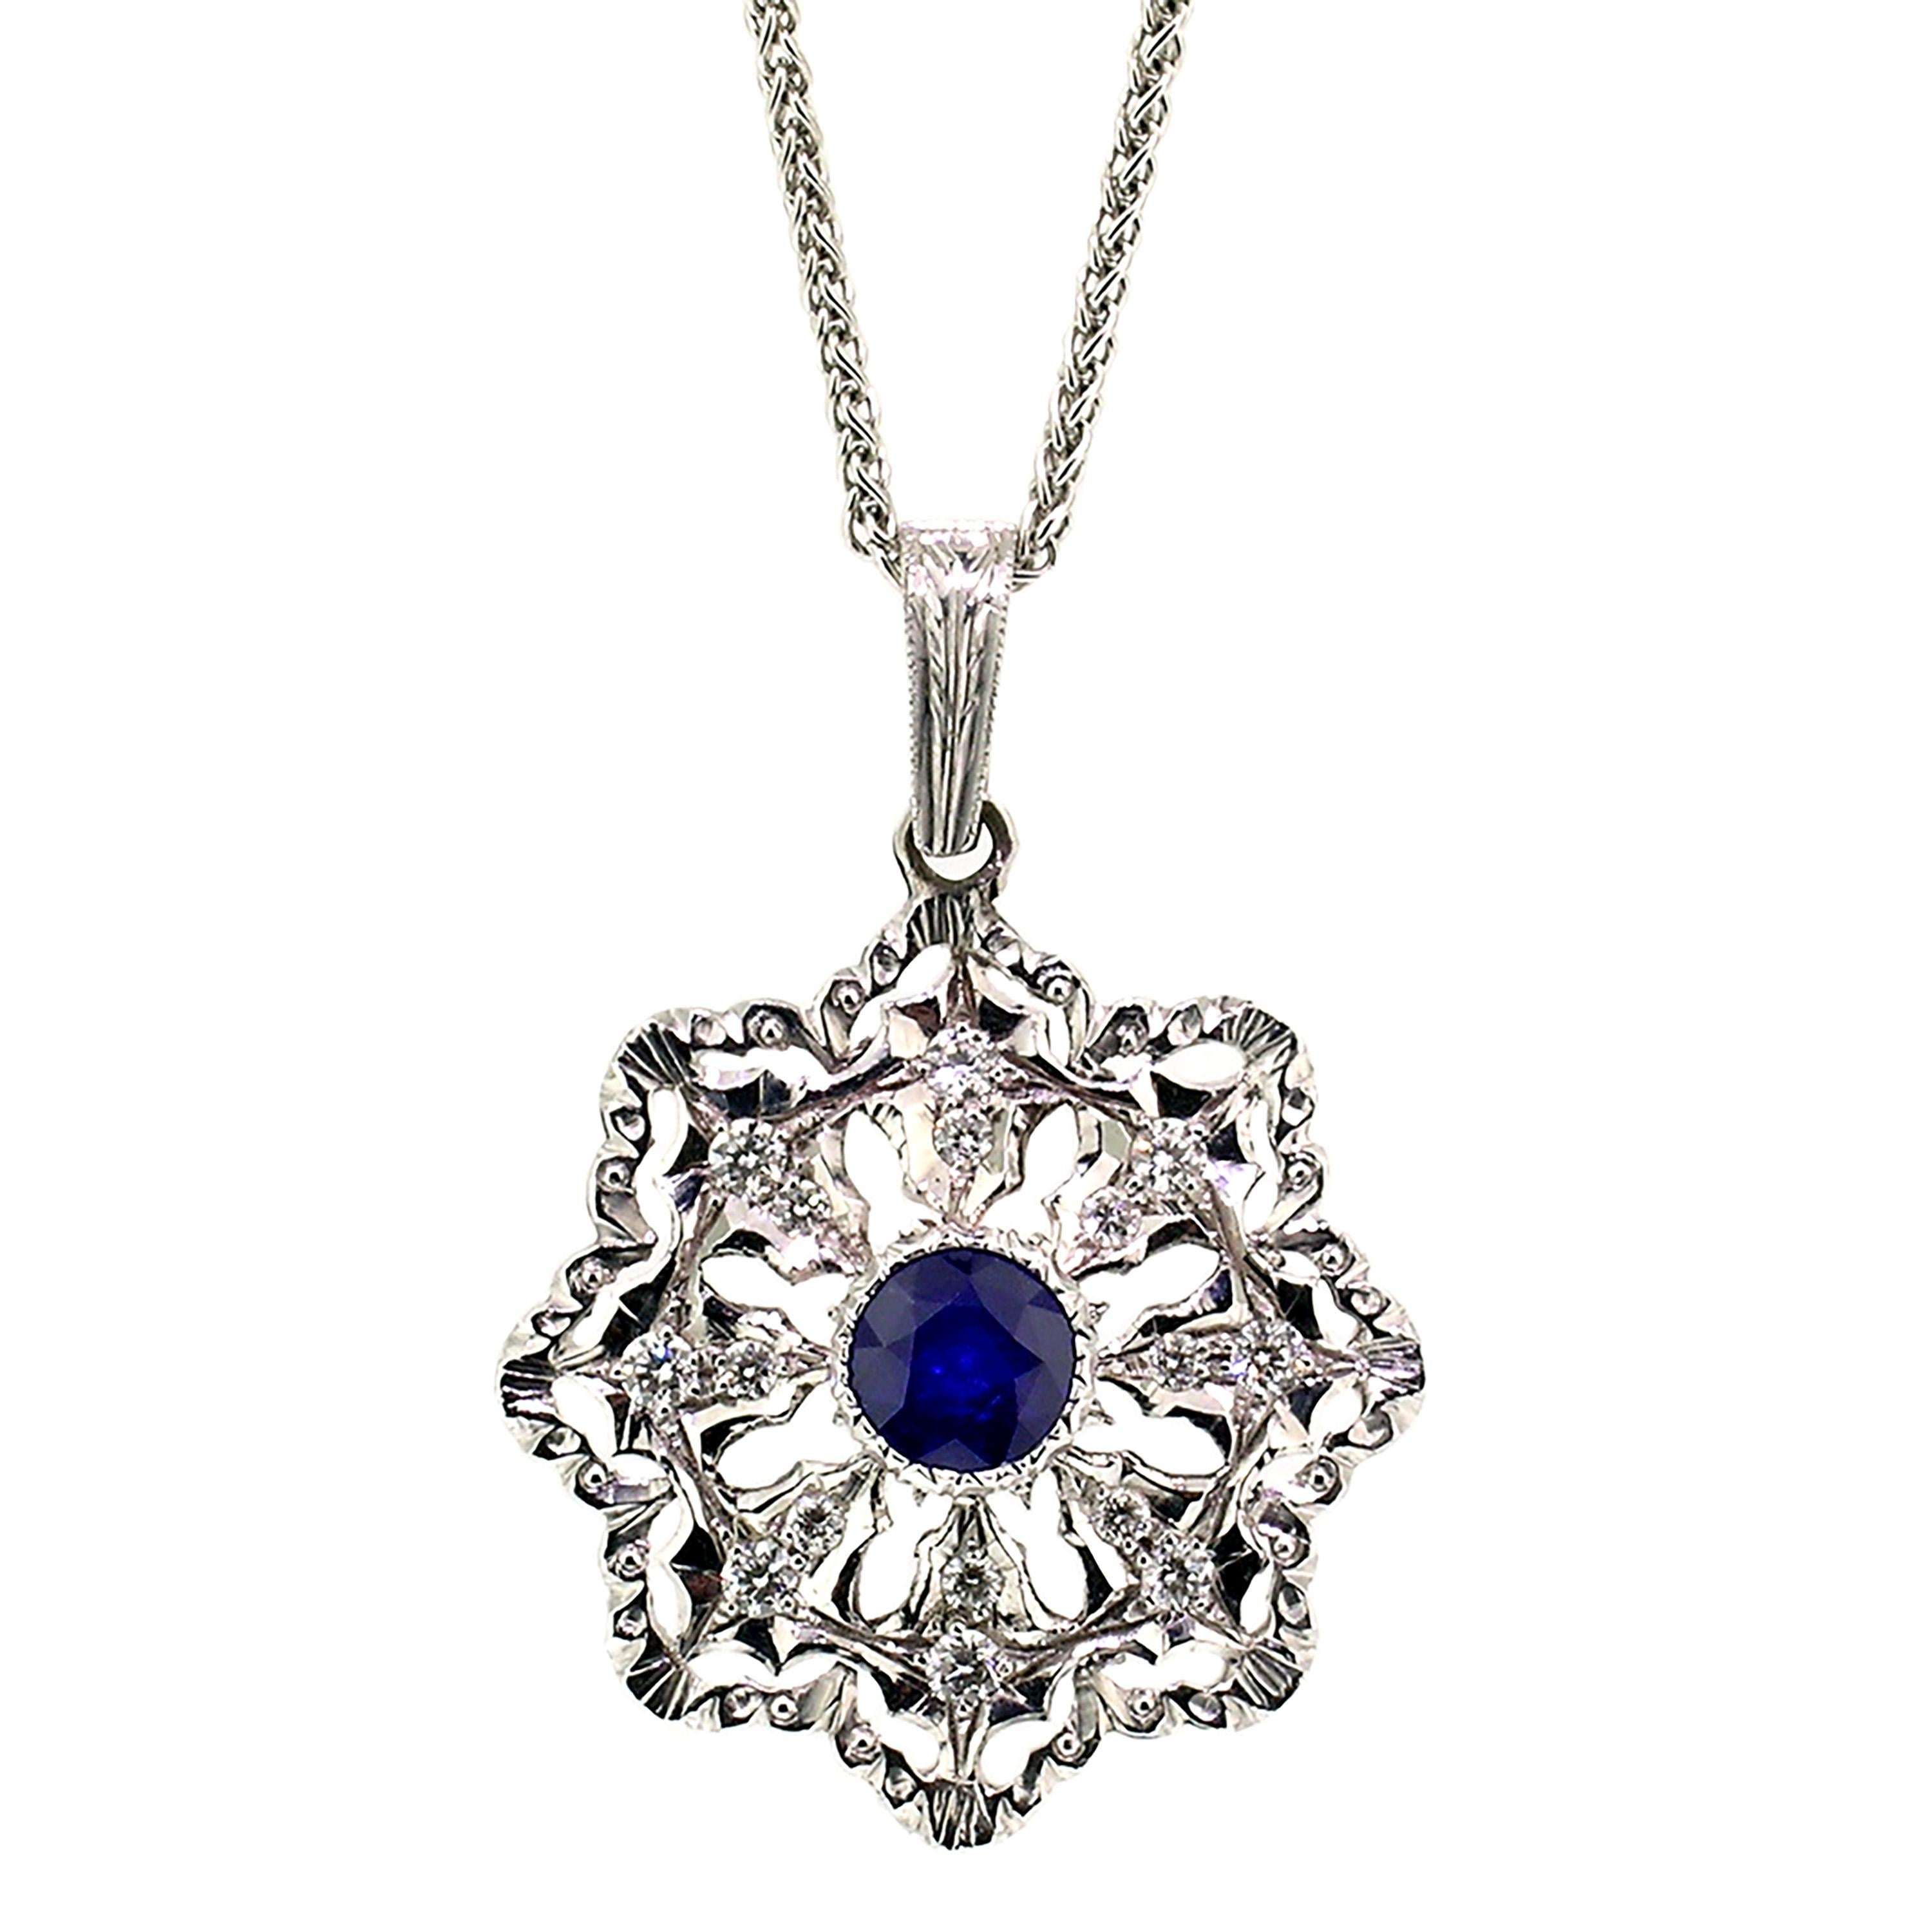 Sapphire and Diamond 18kt Pendant, Made in Italy by Cynthia Scott